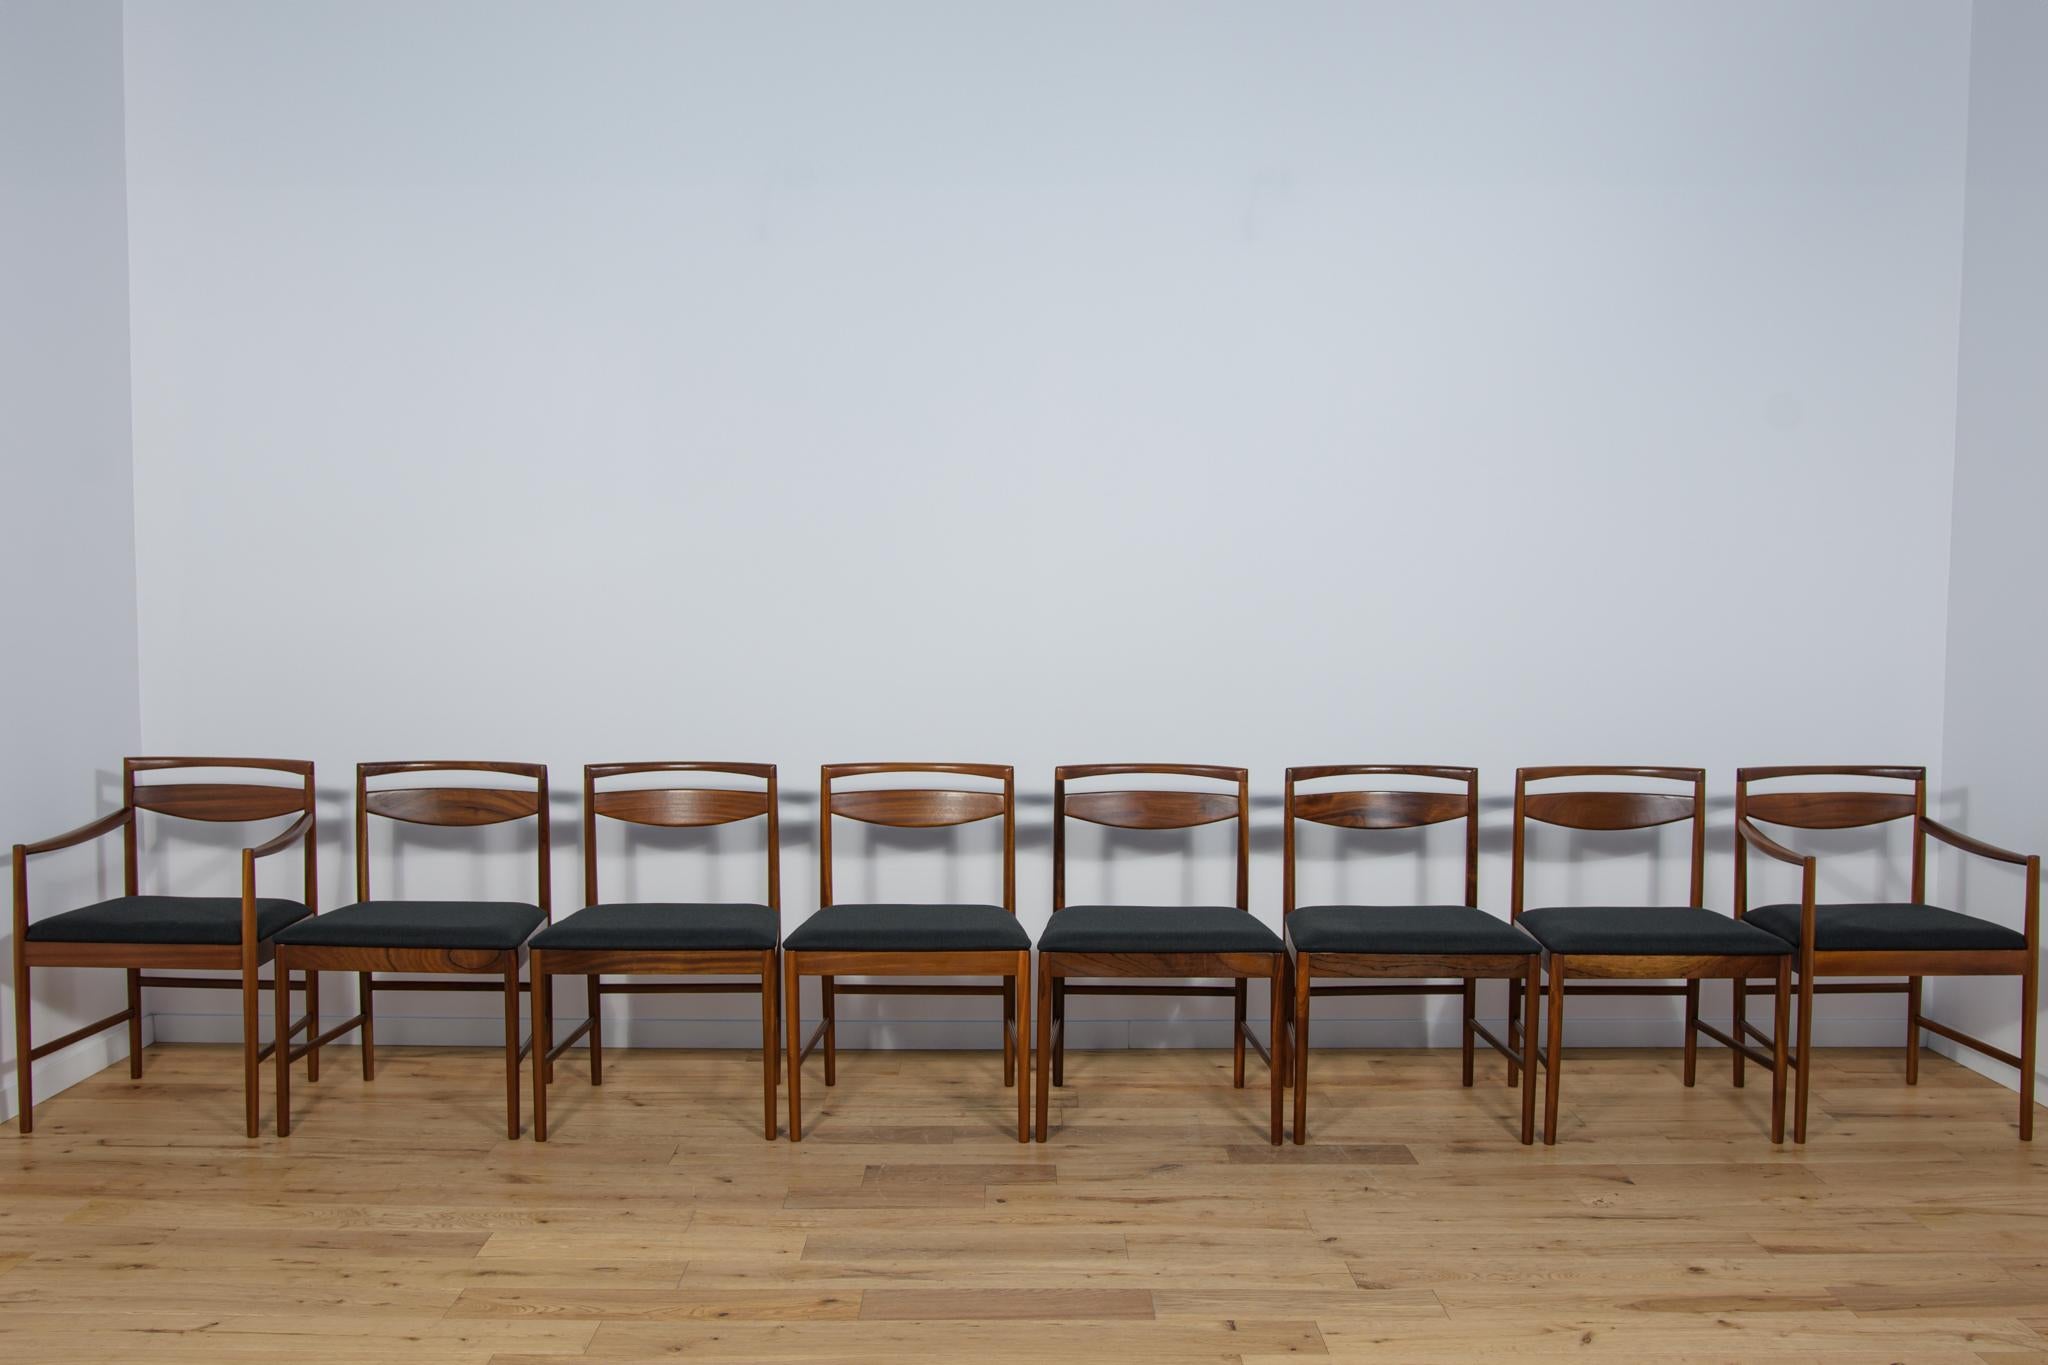 A pair of two armchairs and six chairs Model 9513 designed in 1972 by Tom Robertson for the British manufacturer McIntosh. The chairs have a minimalist Japanese-style frame with organic rounded edges. The set is made of teak wood and has been